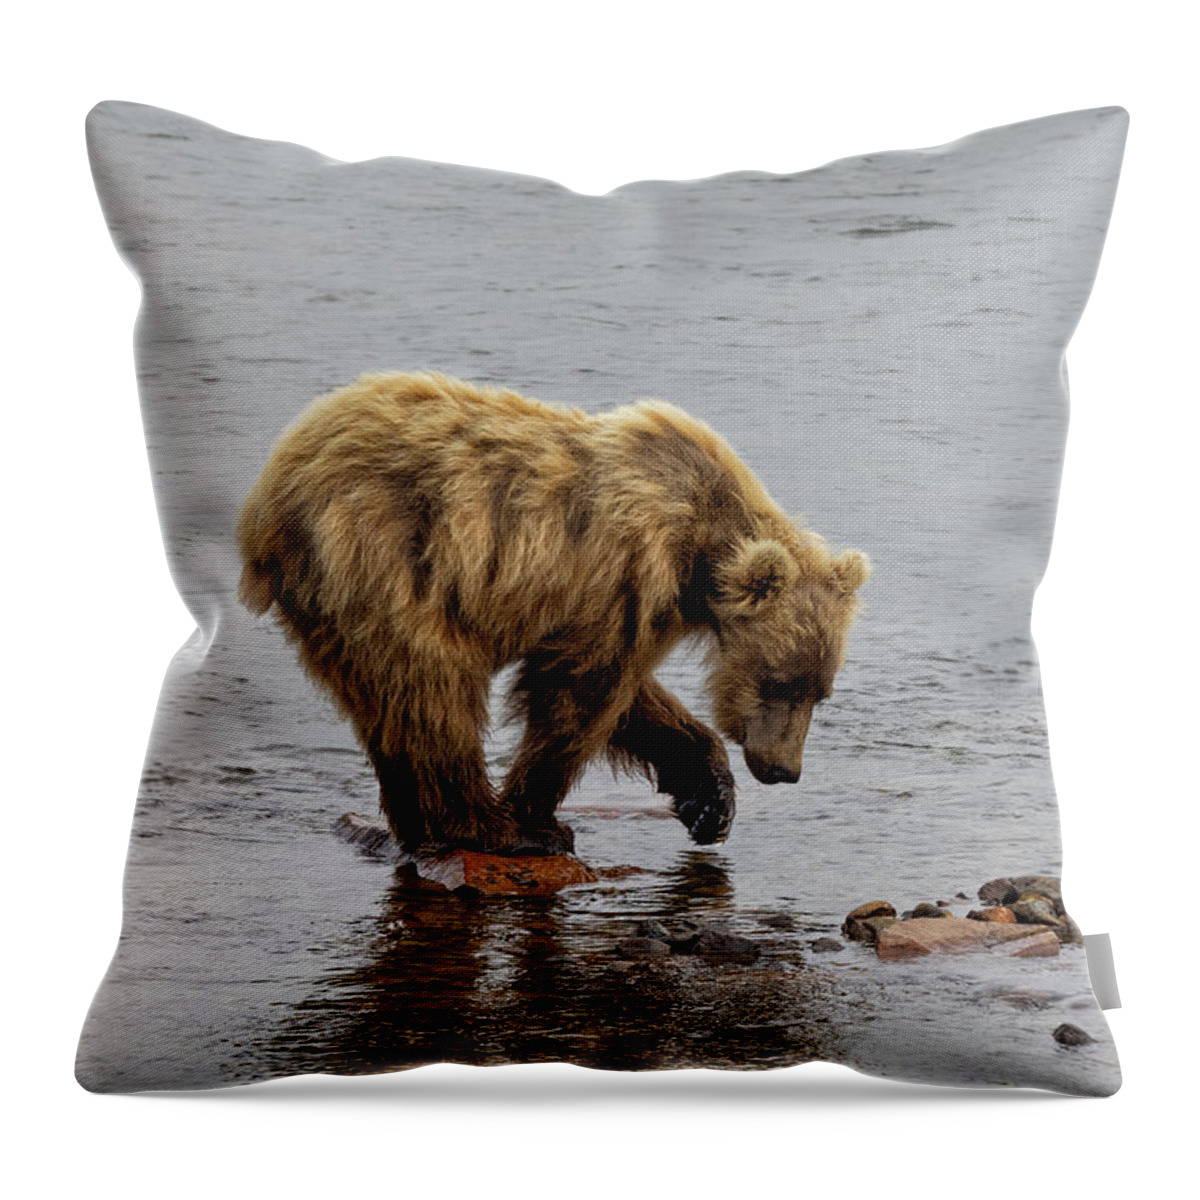 Alaska Throw Pillow featuring the photograph What Do You See by Cheryl Strahl